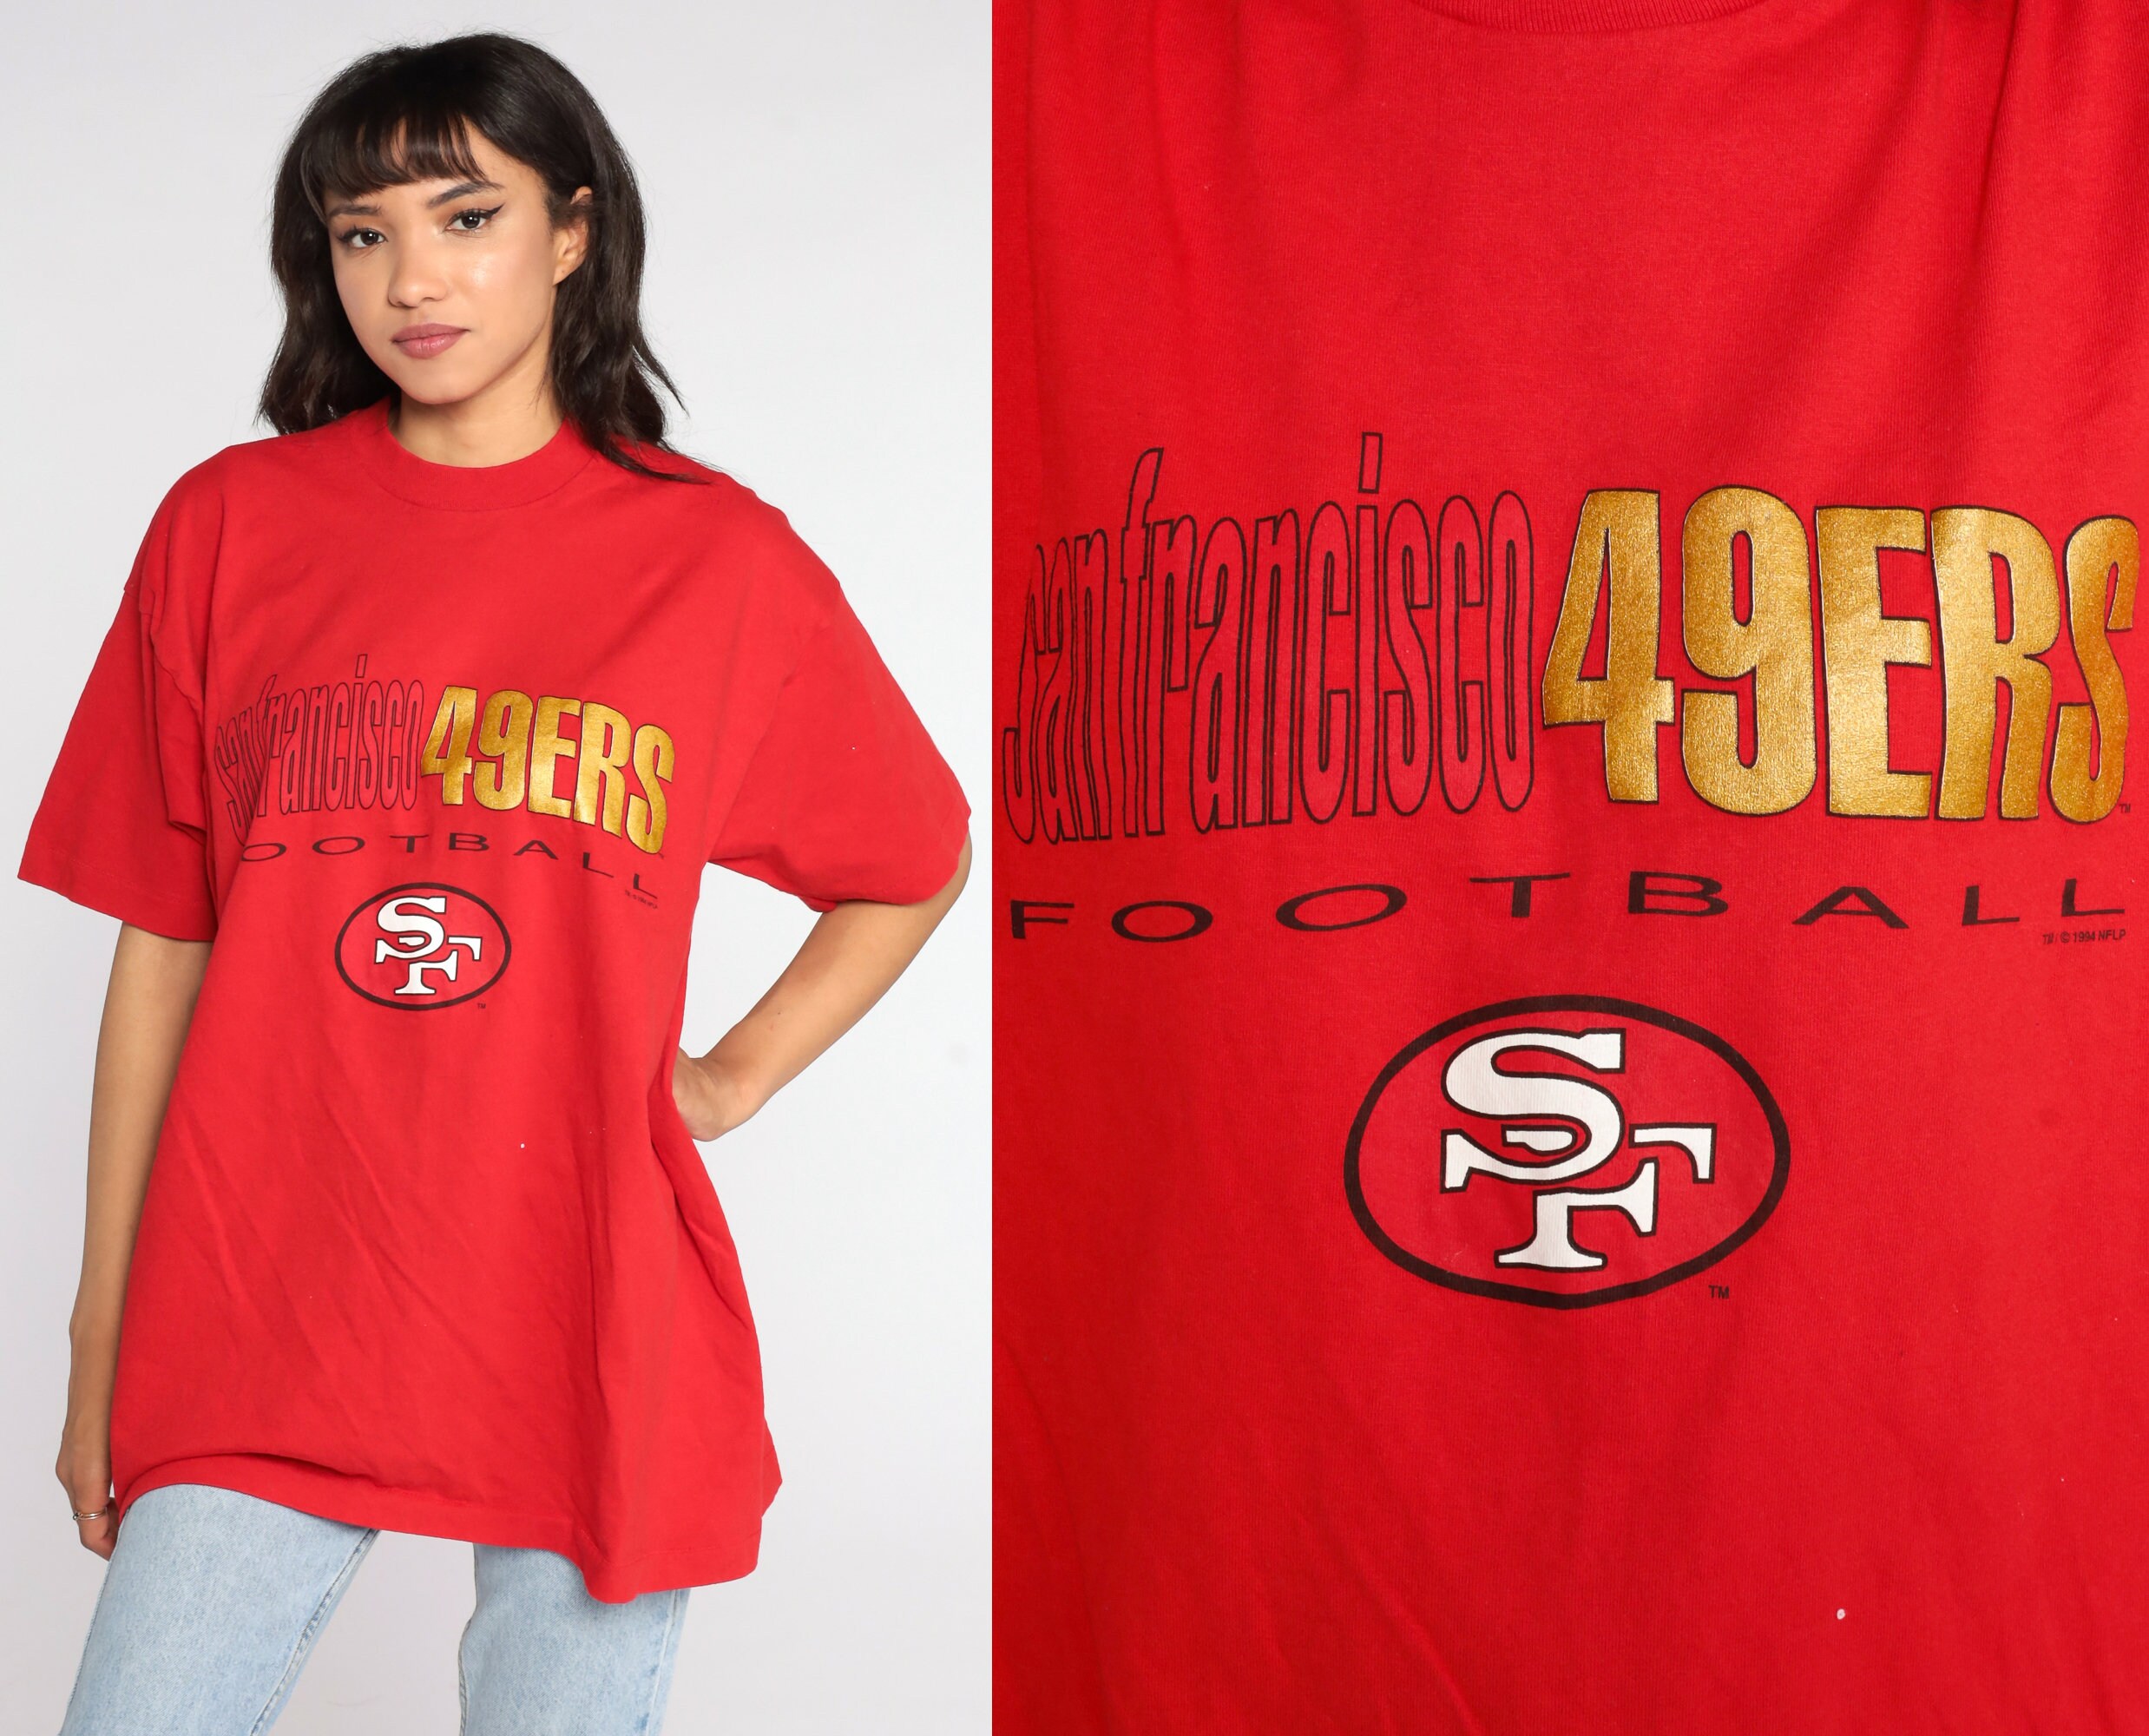 sf 49ers shirts for sale